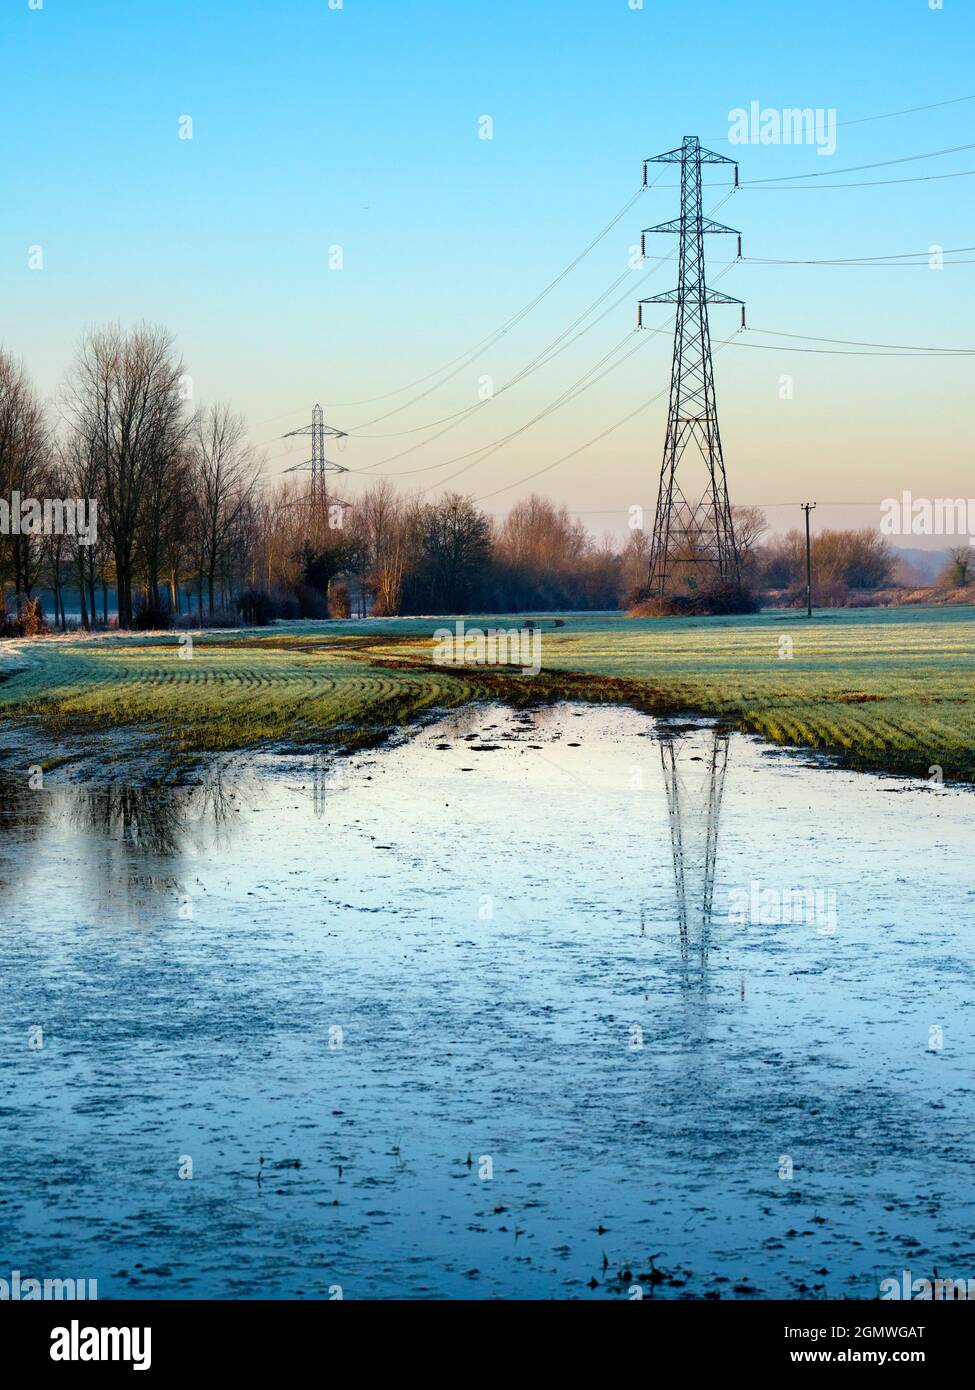 Oxfordshire, England -  27  February 2021; no people in view.    I love electricity pylons; I find their abstract, gaunt shapes endlessly fascinating. Stock Photo